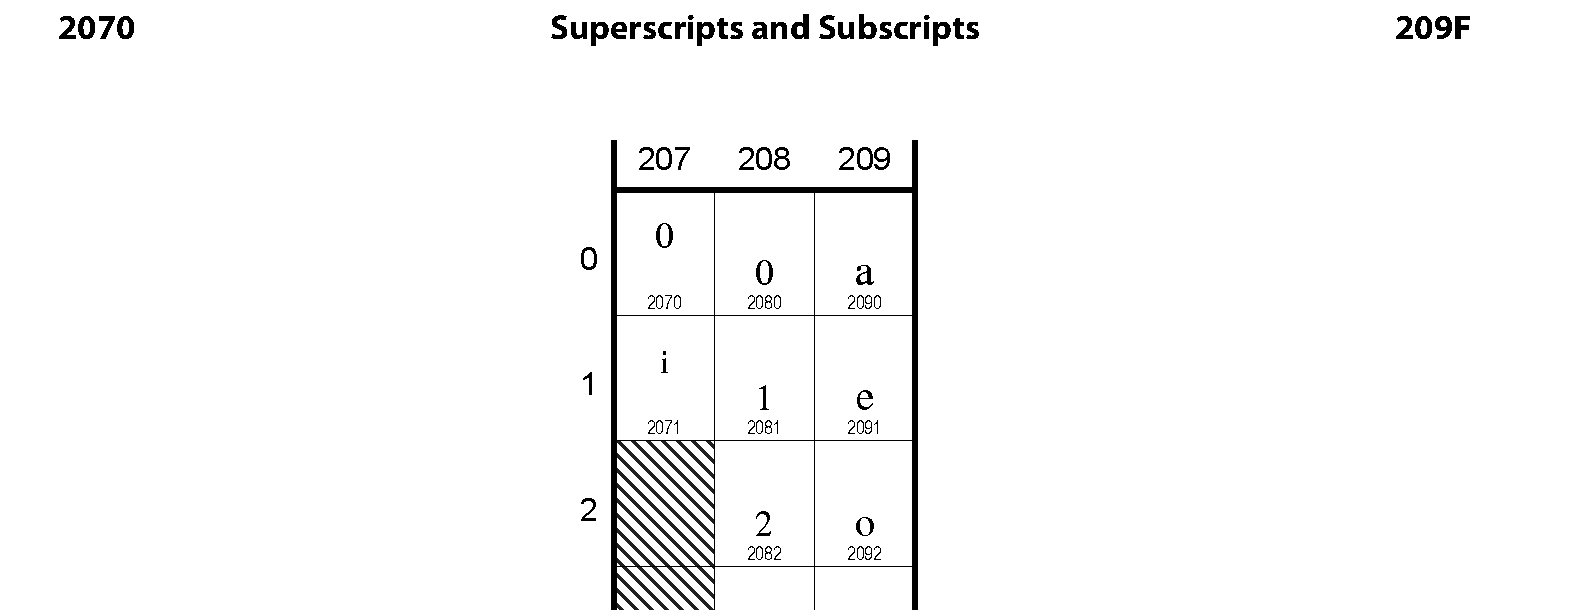 Unicode - Superscripts and Subscripts